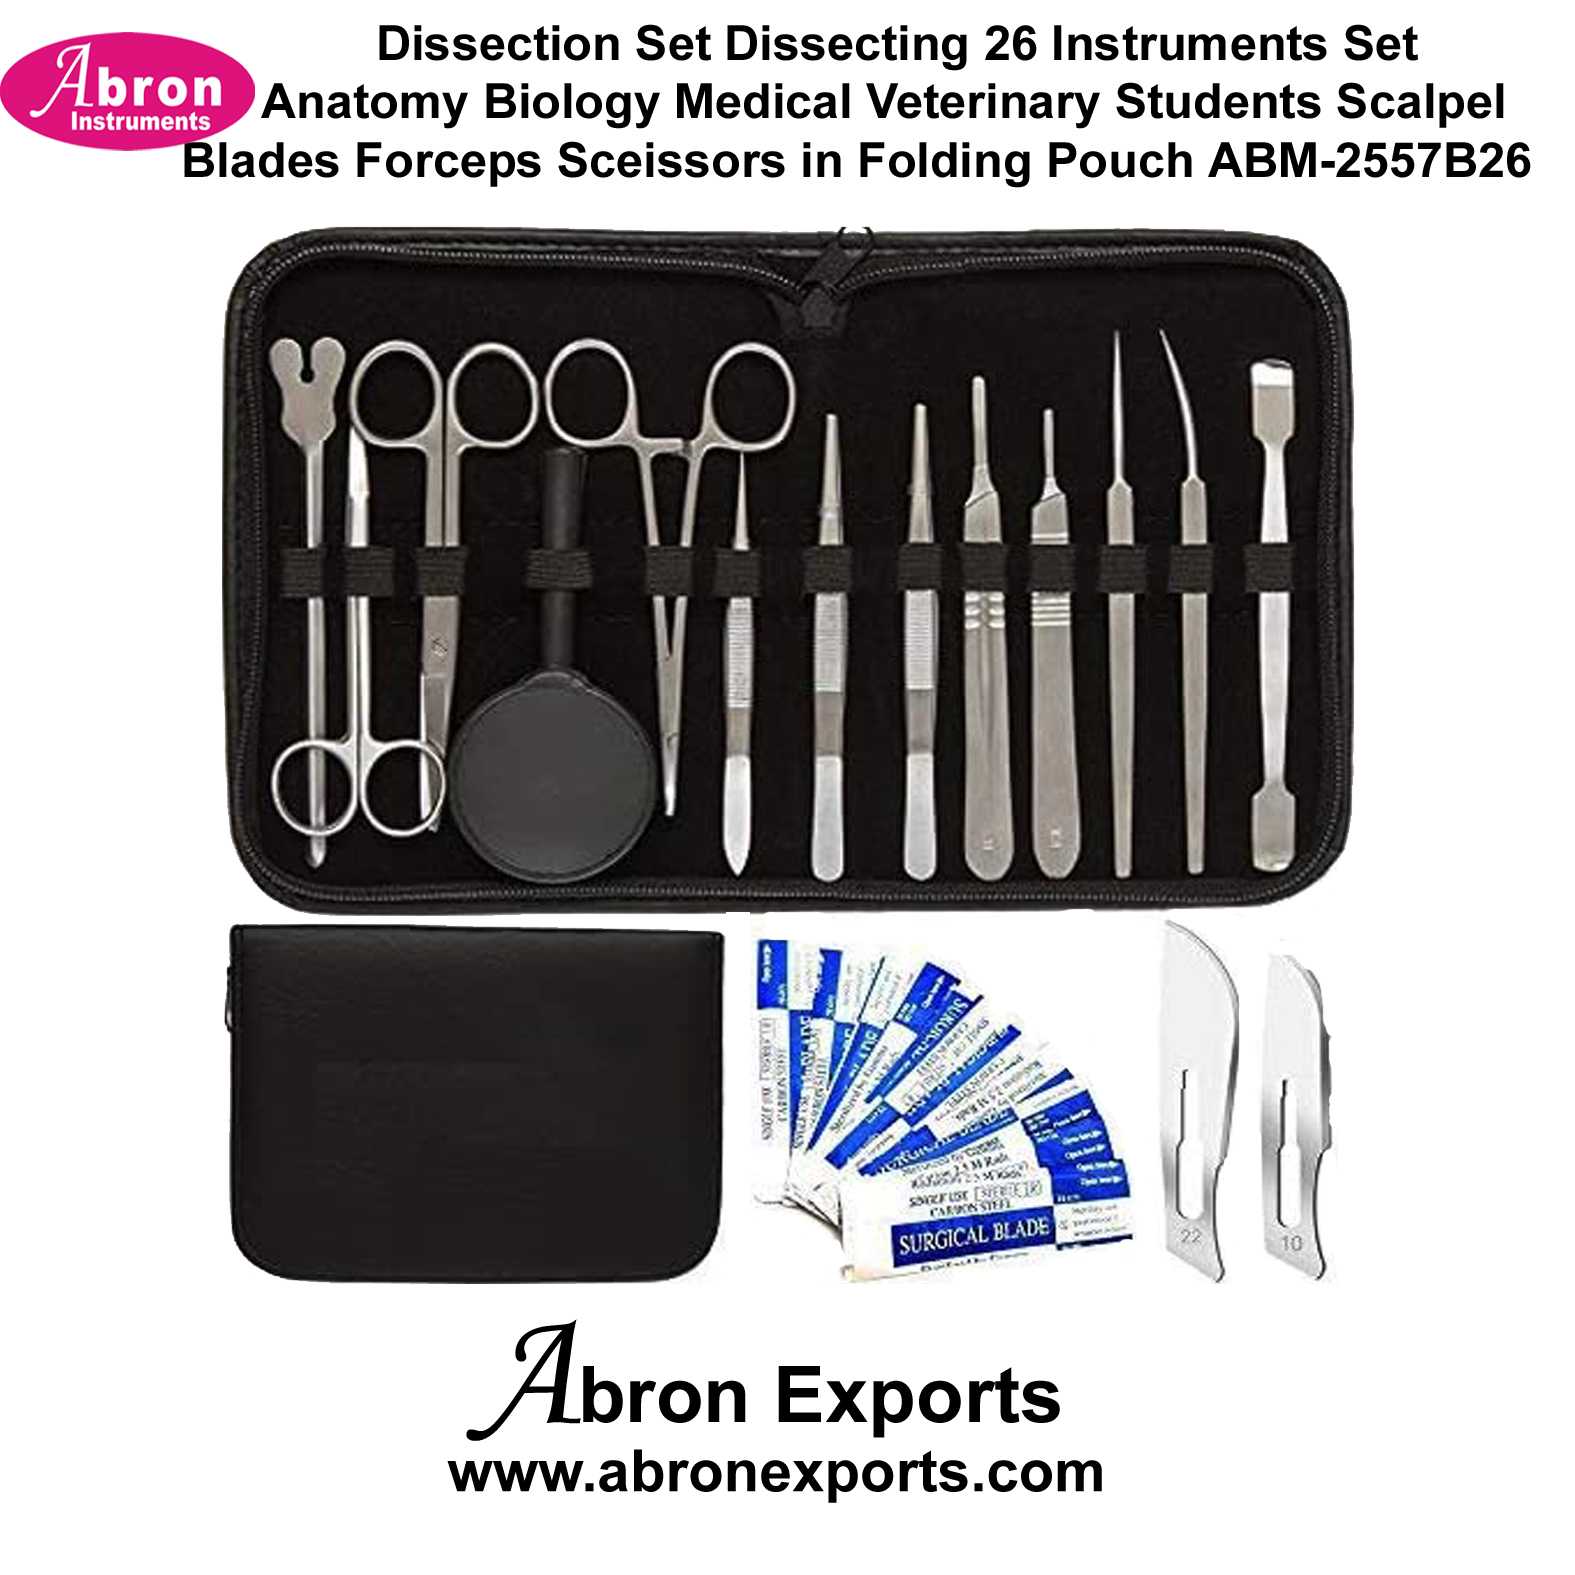 Dissection Set Dissecting 26 Instruments Set Anatomy Biology Medical Veterinary Students Scalpel Blades Forceps Sceissors in Folding Pouch ABM-2557B26 